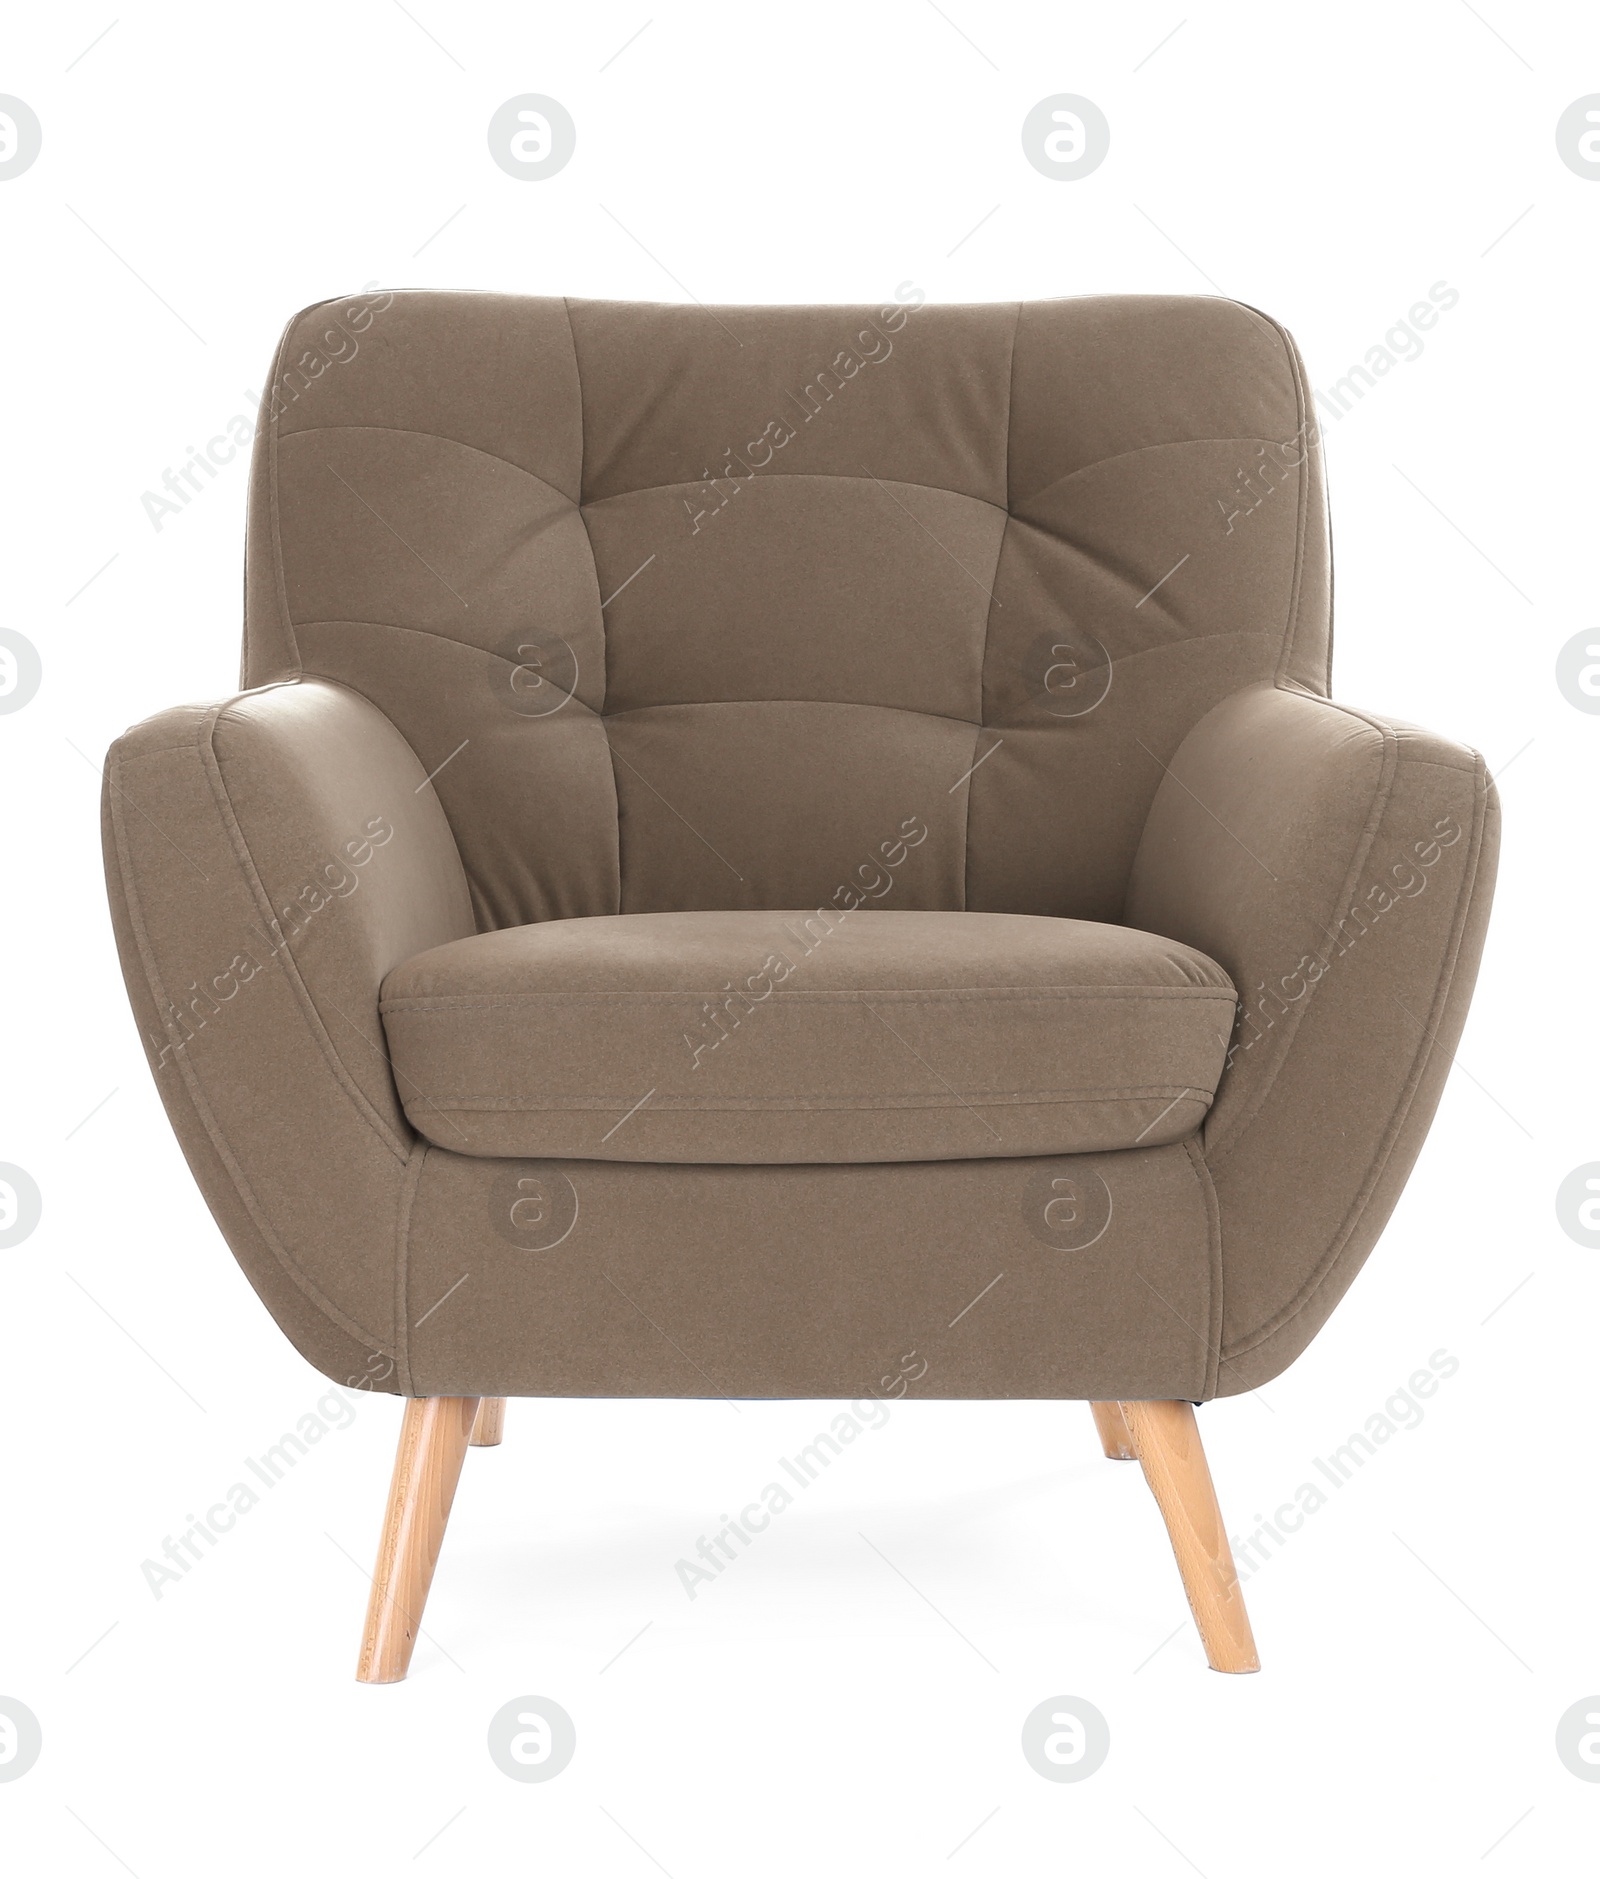 Image of One comfortable dusty brown armchair isolated on white